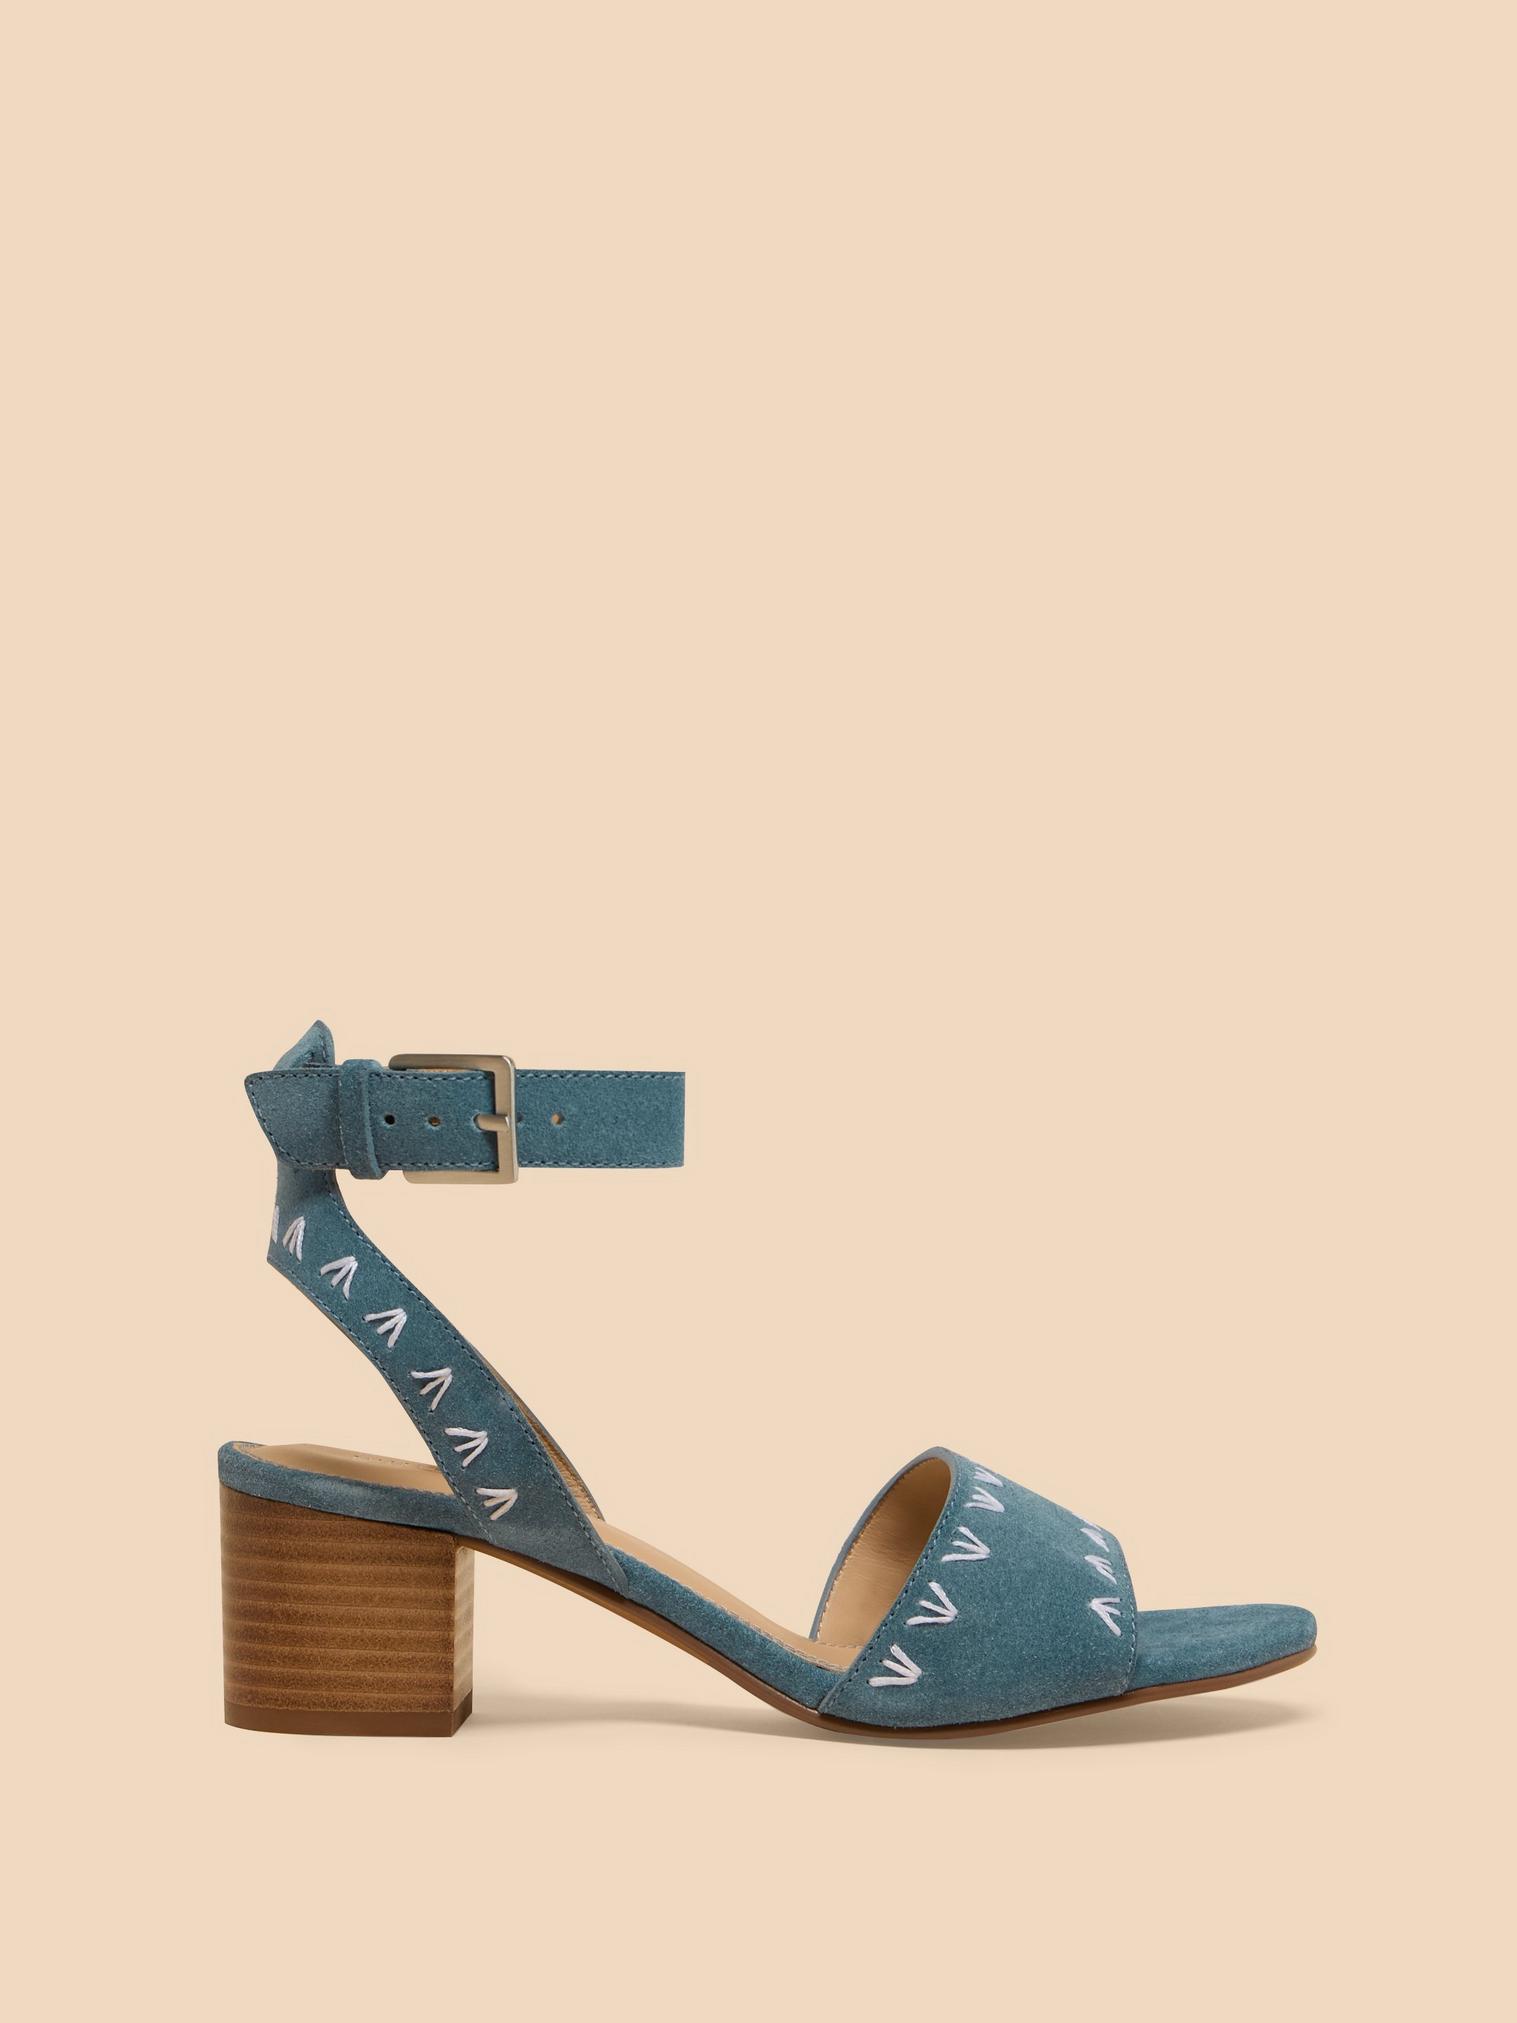 Ivy Suede Heel Sandal in CHAMB BLUE - LIFESTYLE